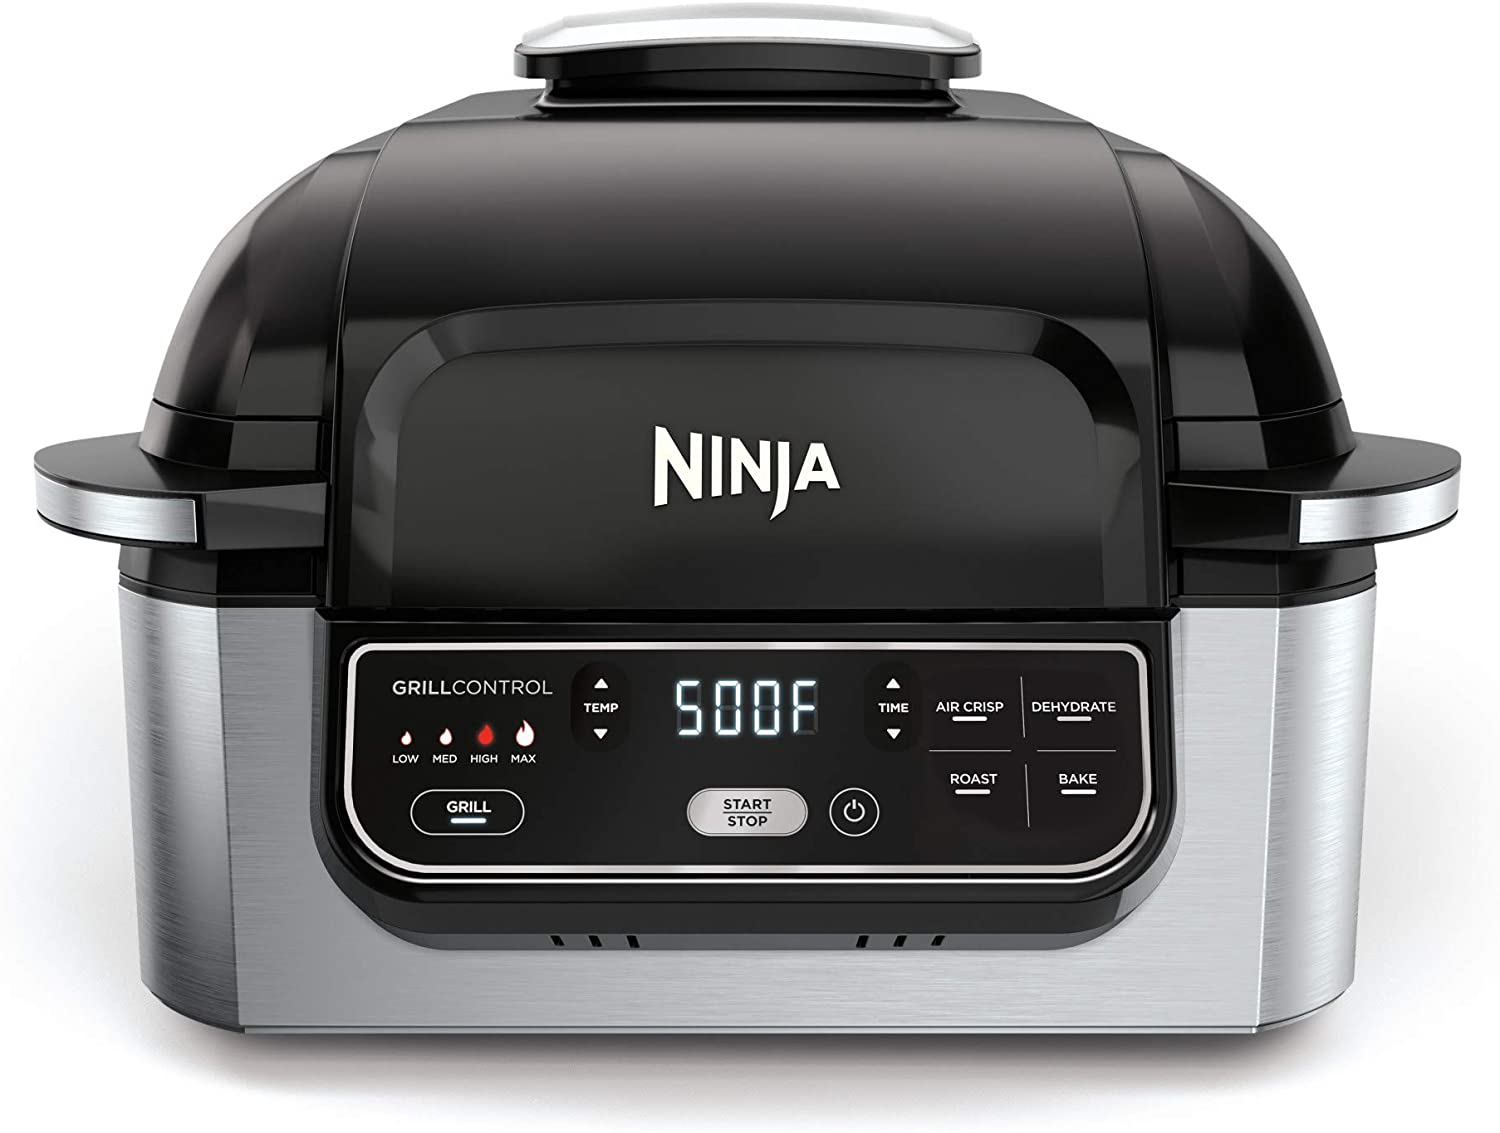 Photo 1 of Ninja Foodi AG301 5in1 Indoor Electric Countertop Grill with 4Quart Air Fryer Roast Bake Dehydrate and Cyclonic Grilling Technology